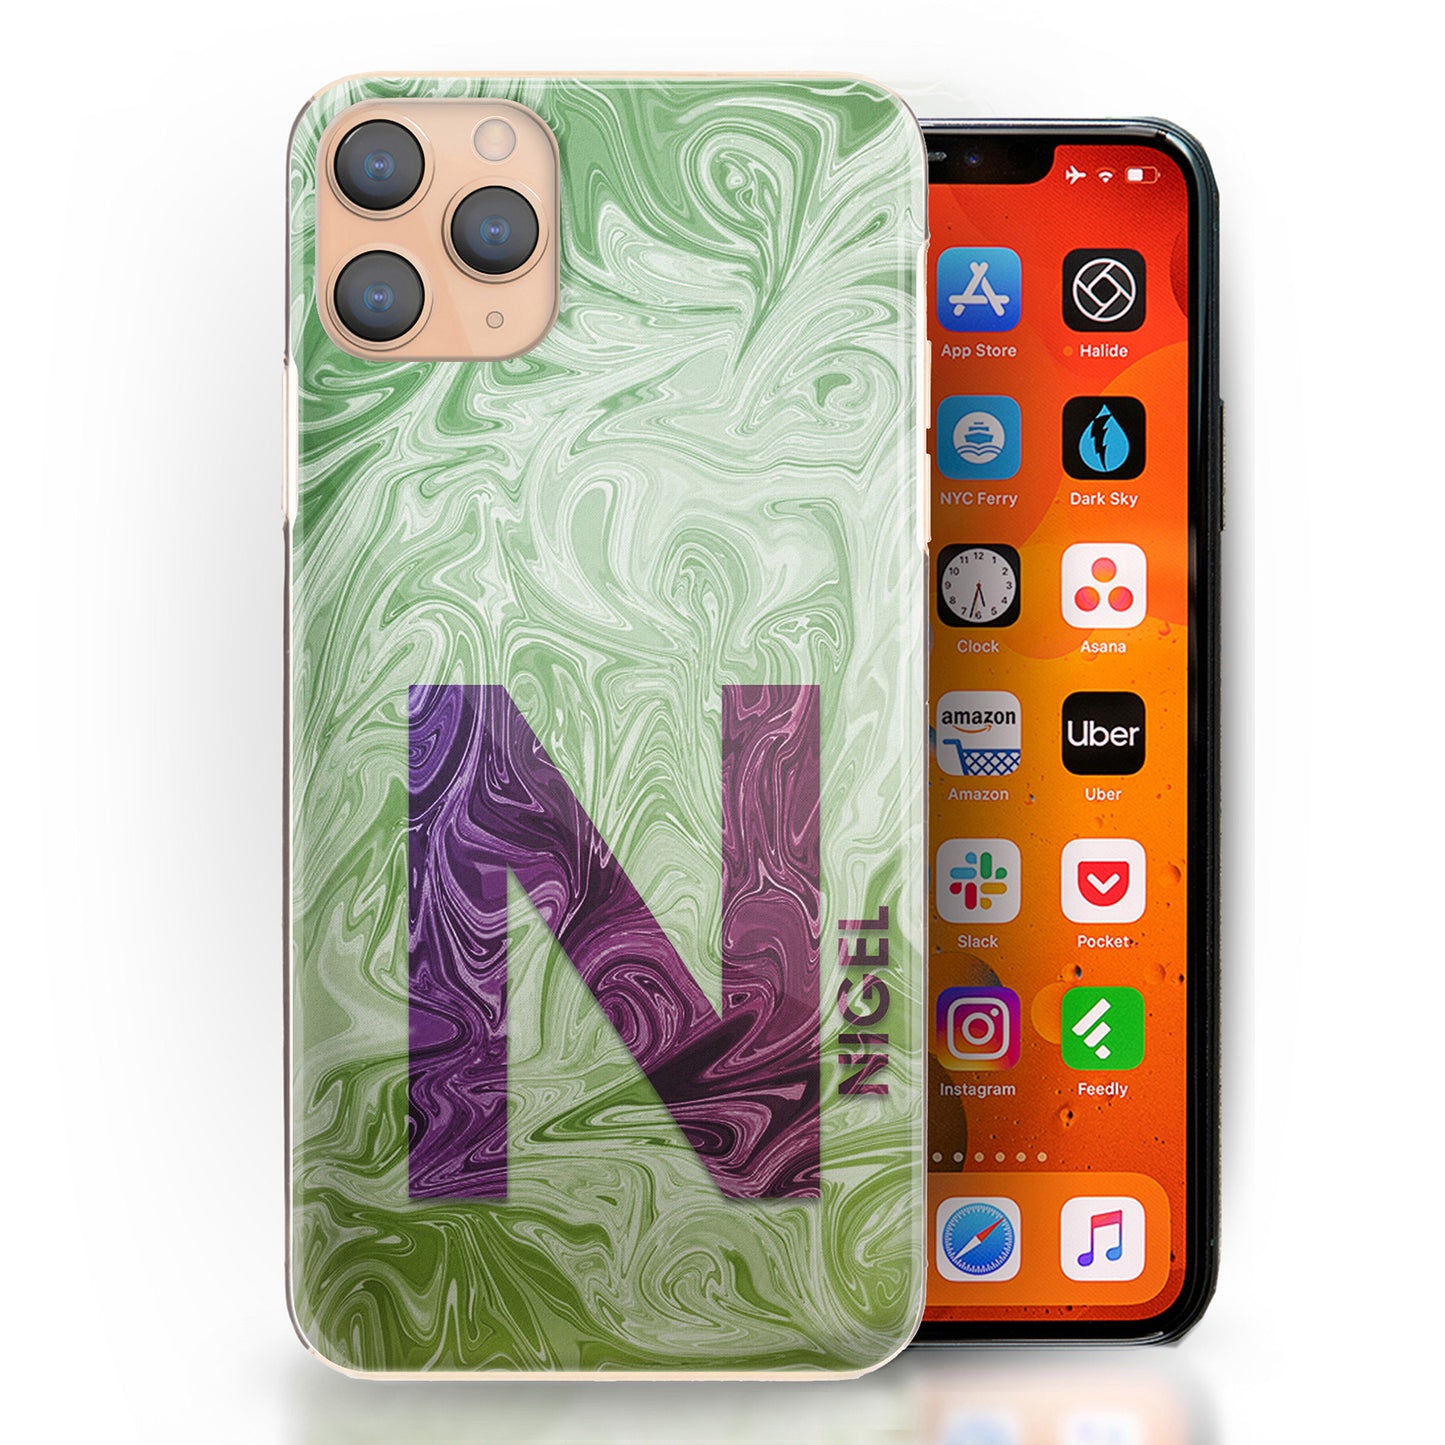 Personalised Huawei Phone Hard Case with Purple Text and Initial on Green Swirled Marble